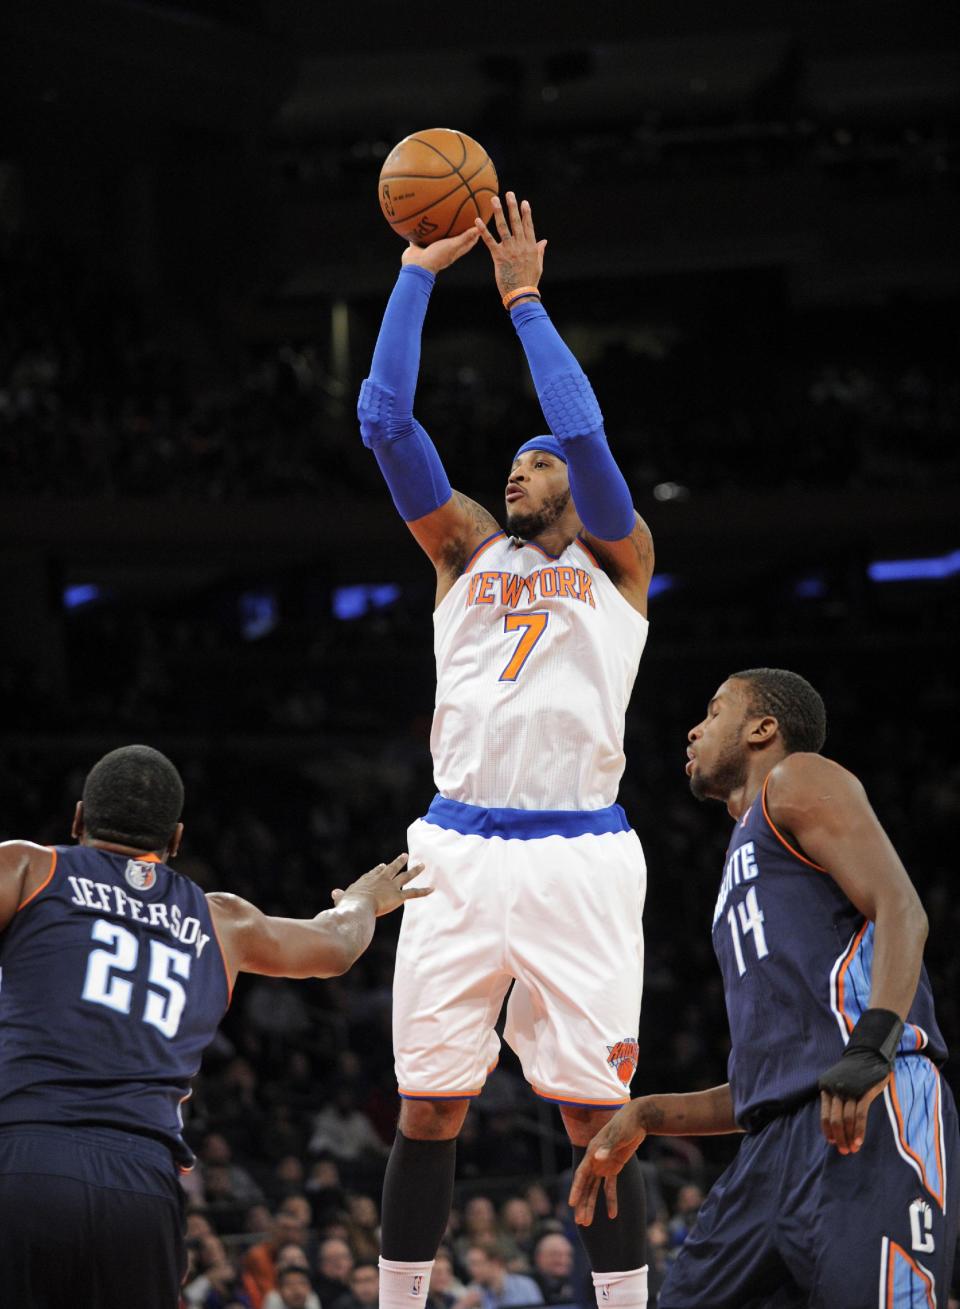 New York Knicks' Carmelo Anthony (7) puts up a shot between Charlotte Bobcats' Al Jefferson, left, and Michael Kidd-Gilchrist, right, during the first quarter of an NBA basketball game, Friday, Jan. 24, 2014, at Madison Square Garden in New York. Anthony scored 62 points as the Knicks defeated the Bobcats 125-96. (AP Photo/Bill Kostroun)